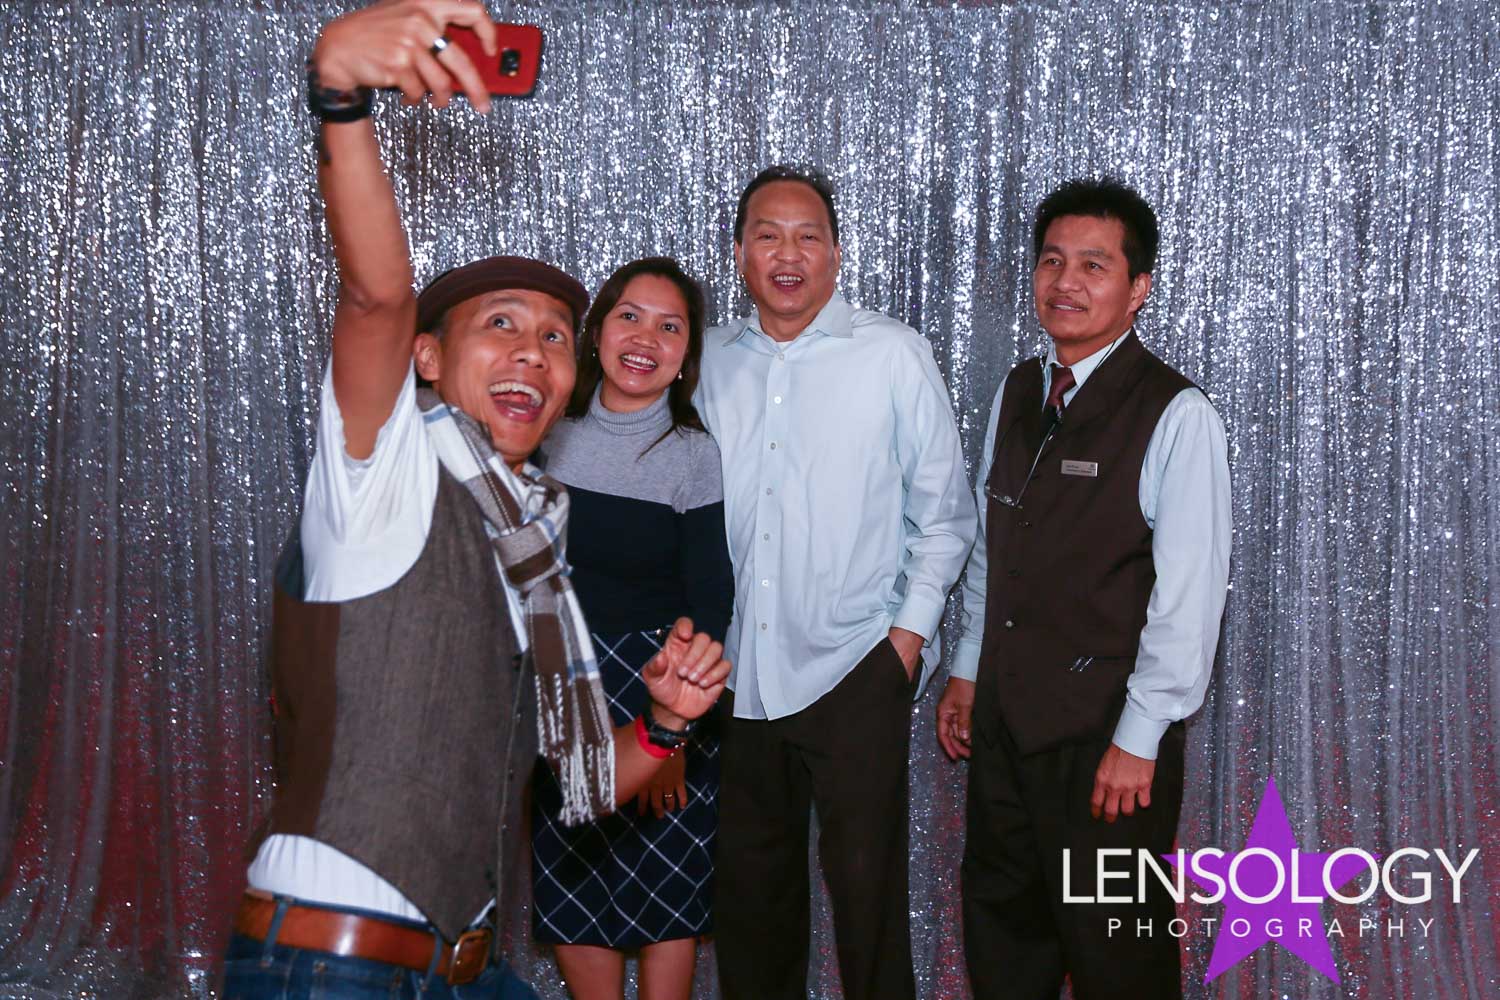 LENSOLOGY.NET - Sheraton Hogels red carpet event, LA, CA.
All images are copyright of Lensology.net
Email: info@lensology.net
www.lensology.net